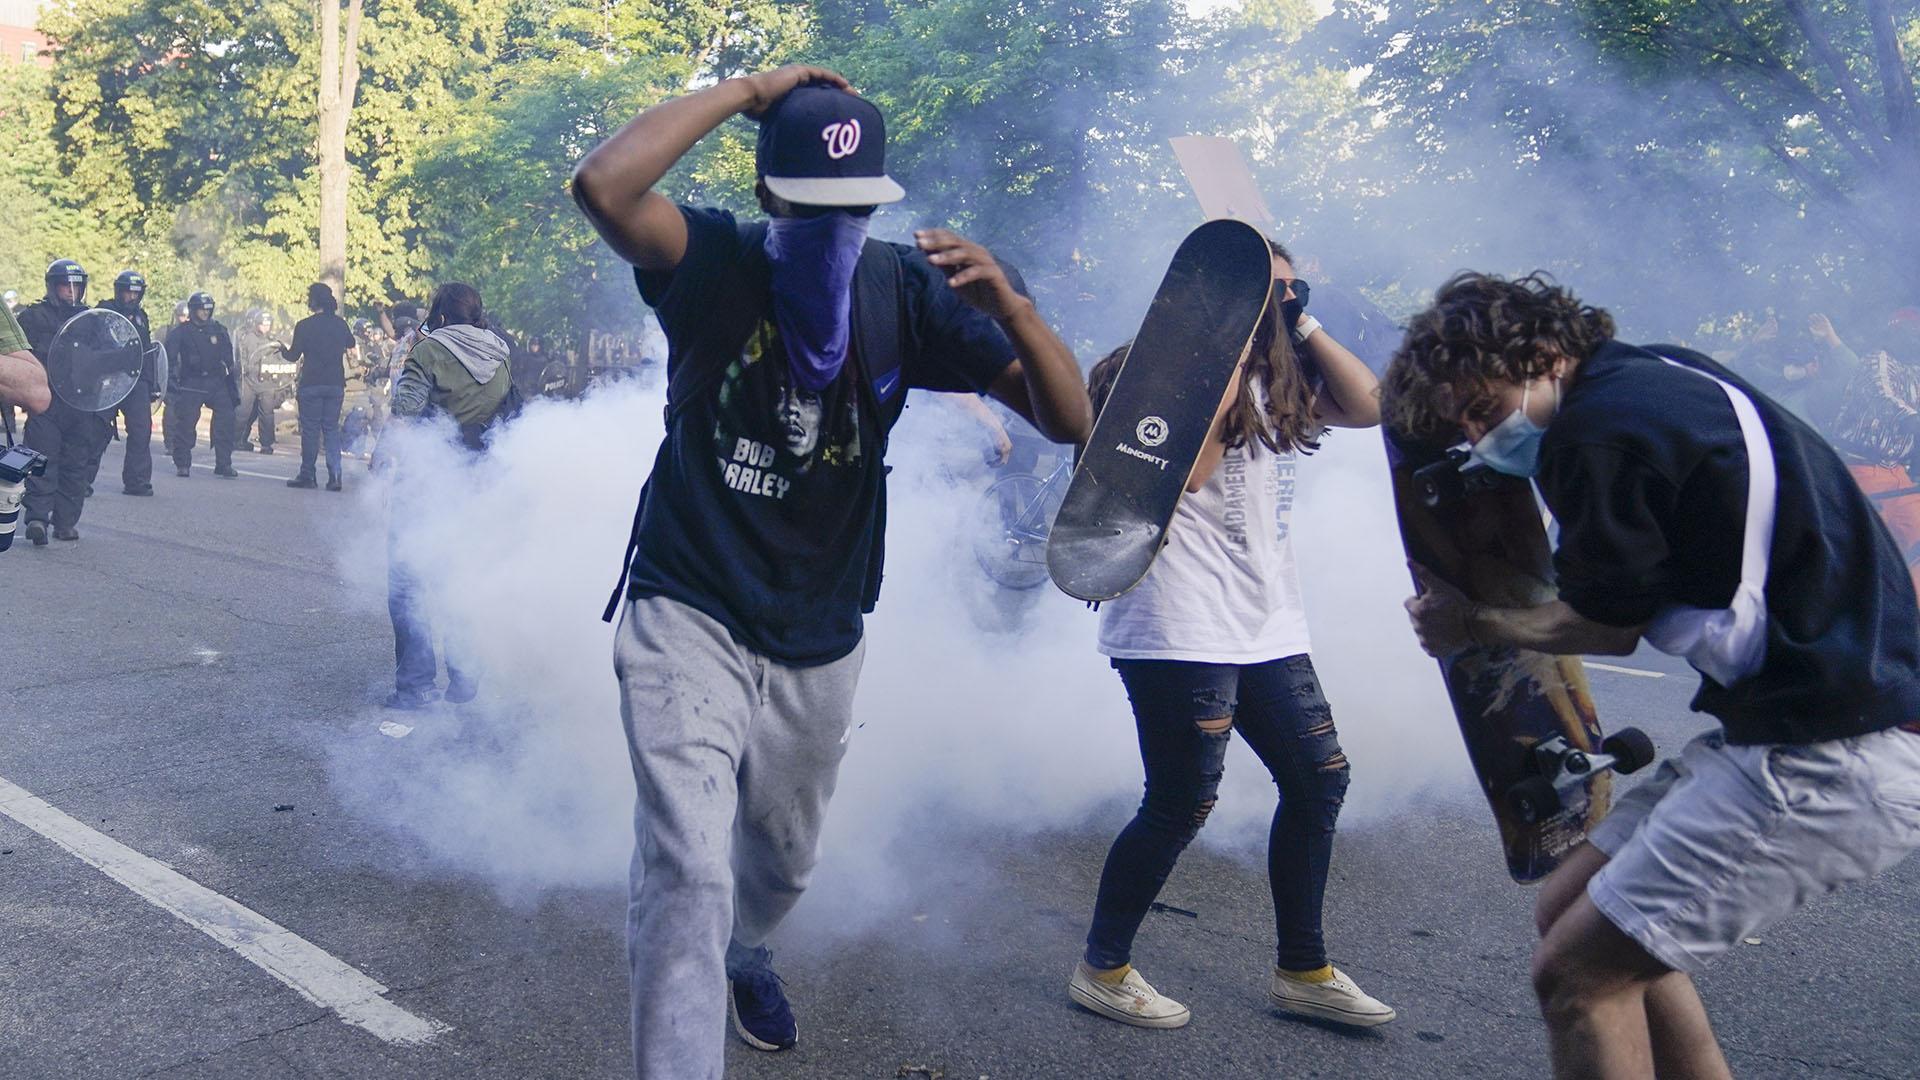 Demonstrators, who had gathered to protest the death of George Floyd, begin to run from tear gas used by police to clear the street near the White House in Washington, Monday, June 1, 2020. (AP Photo / Evan Vucci)